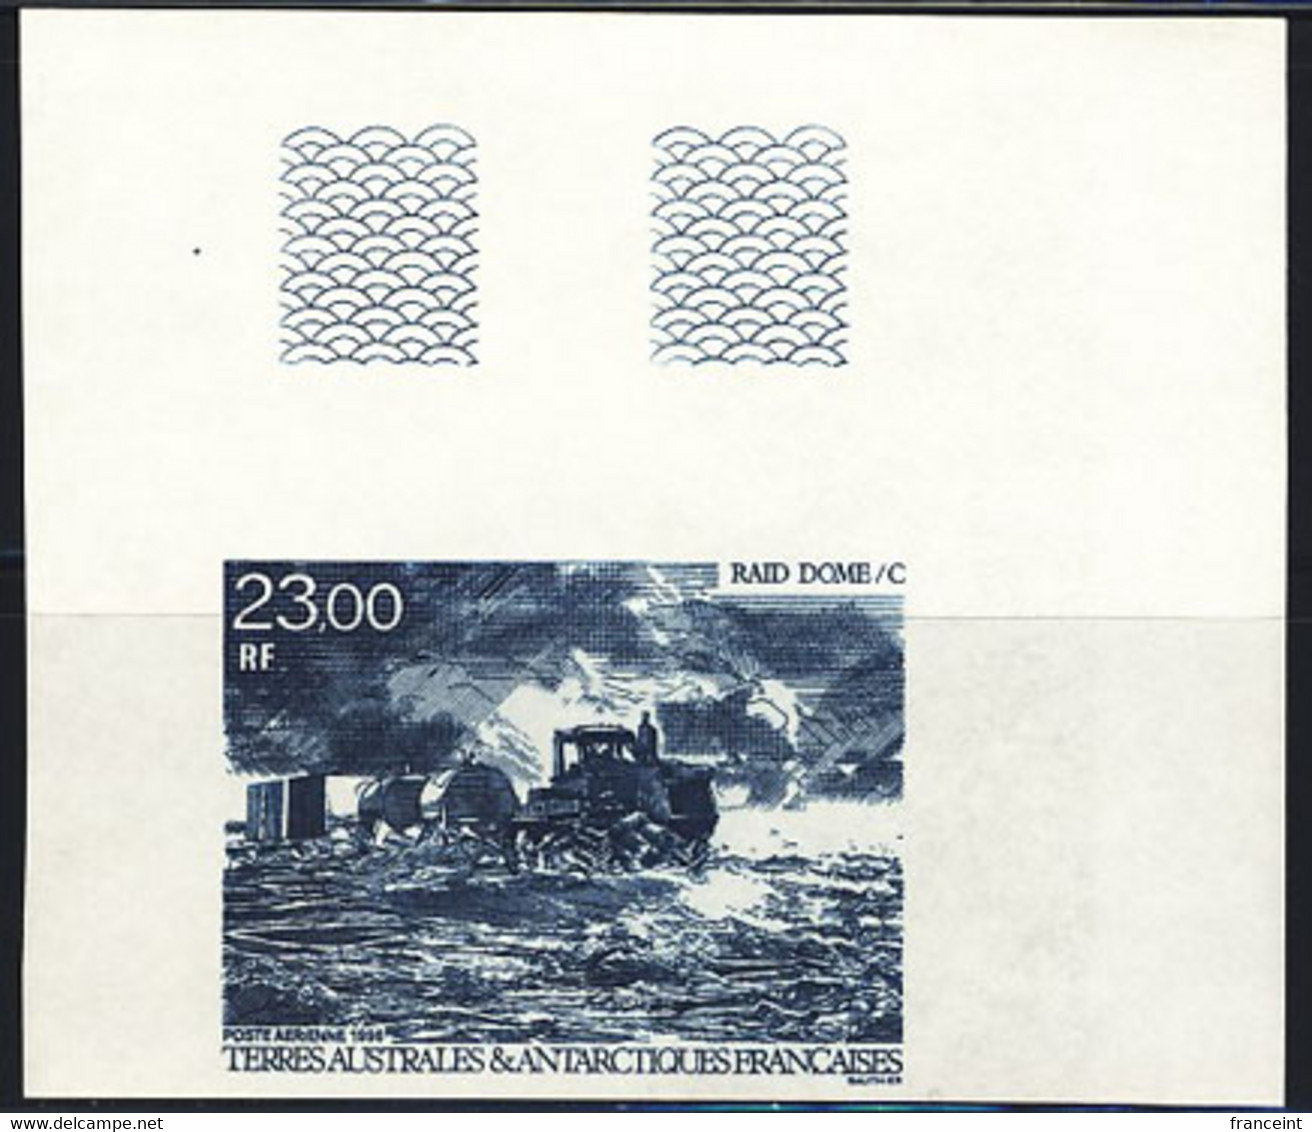 F.S.A.T. (1996) Expedition To Dome/C. Corner Imperforate. Scott No C137, Yvert No PA138. - Imperforates, Proofs & Errors